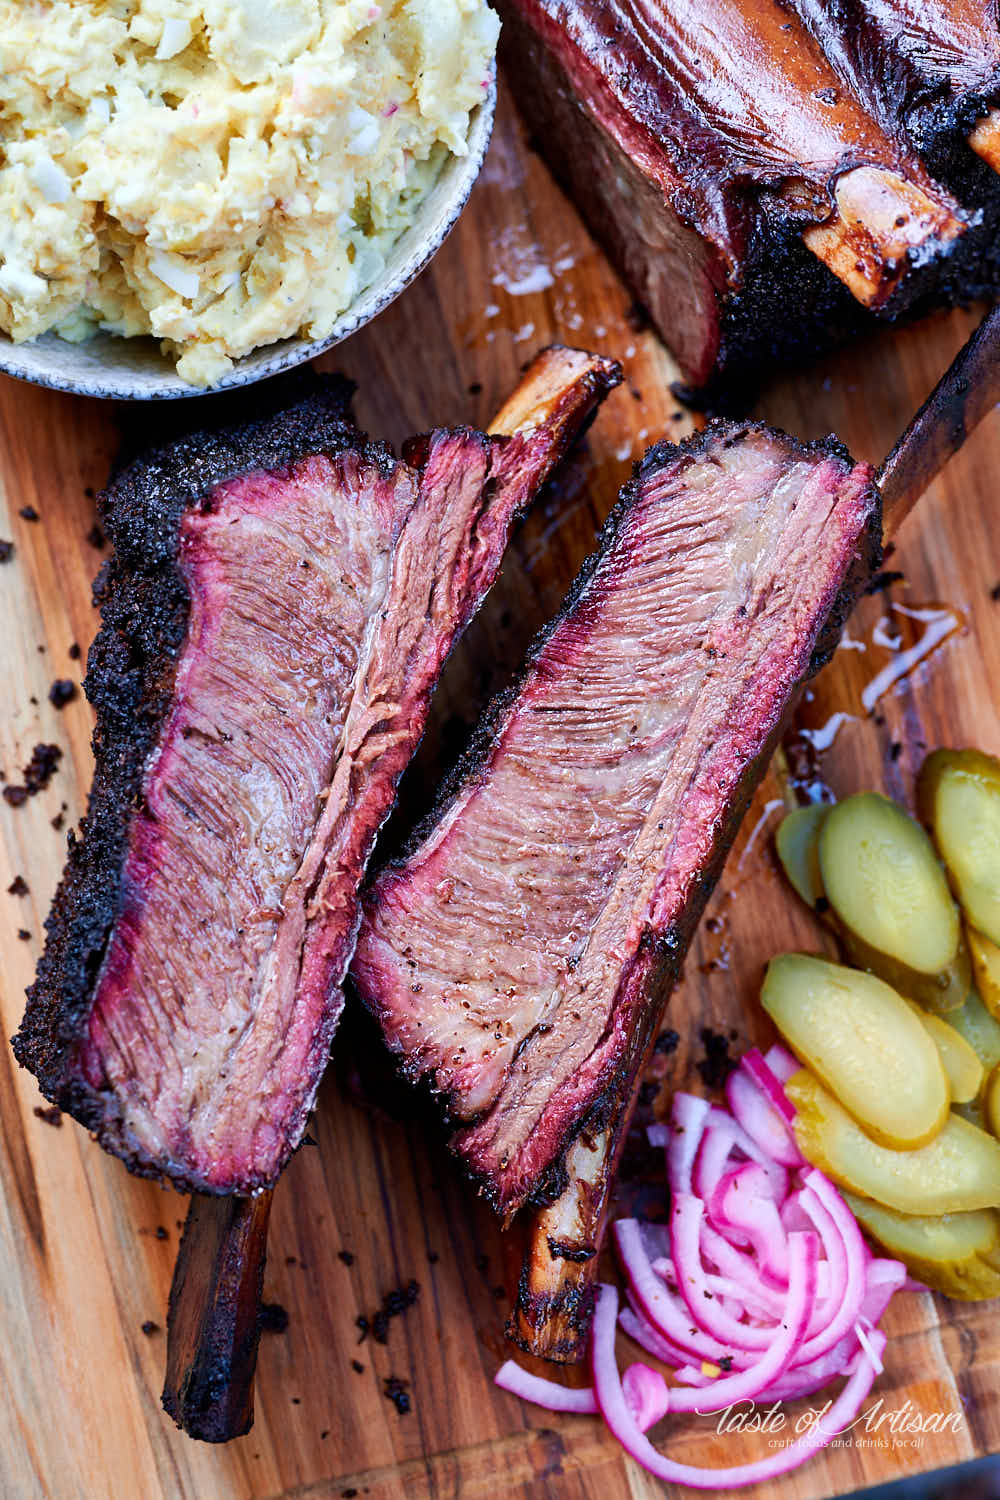 Beef short ribs on a serving board with potato salad, pickles and pickled red onions.